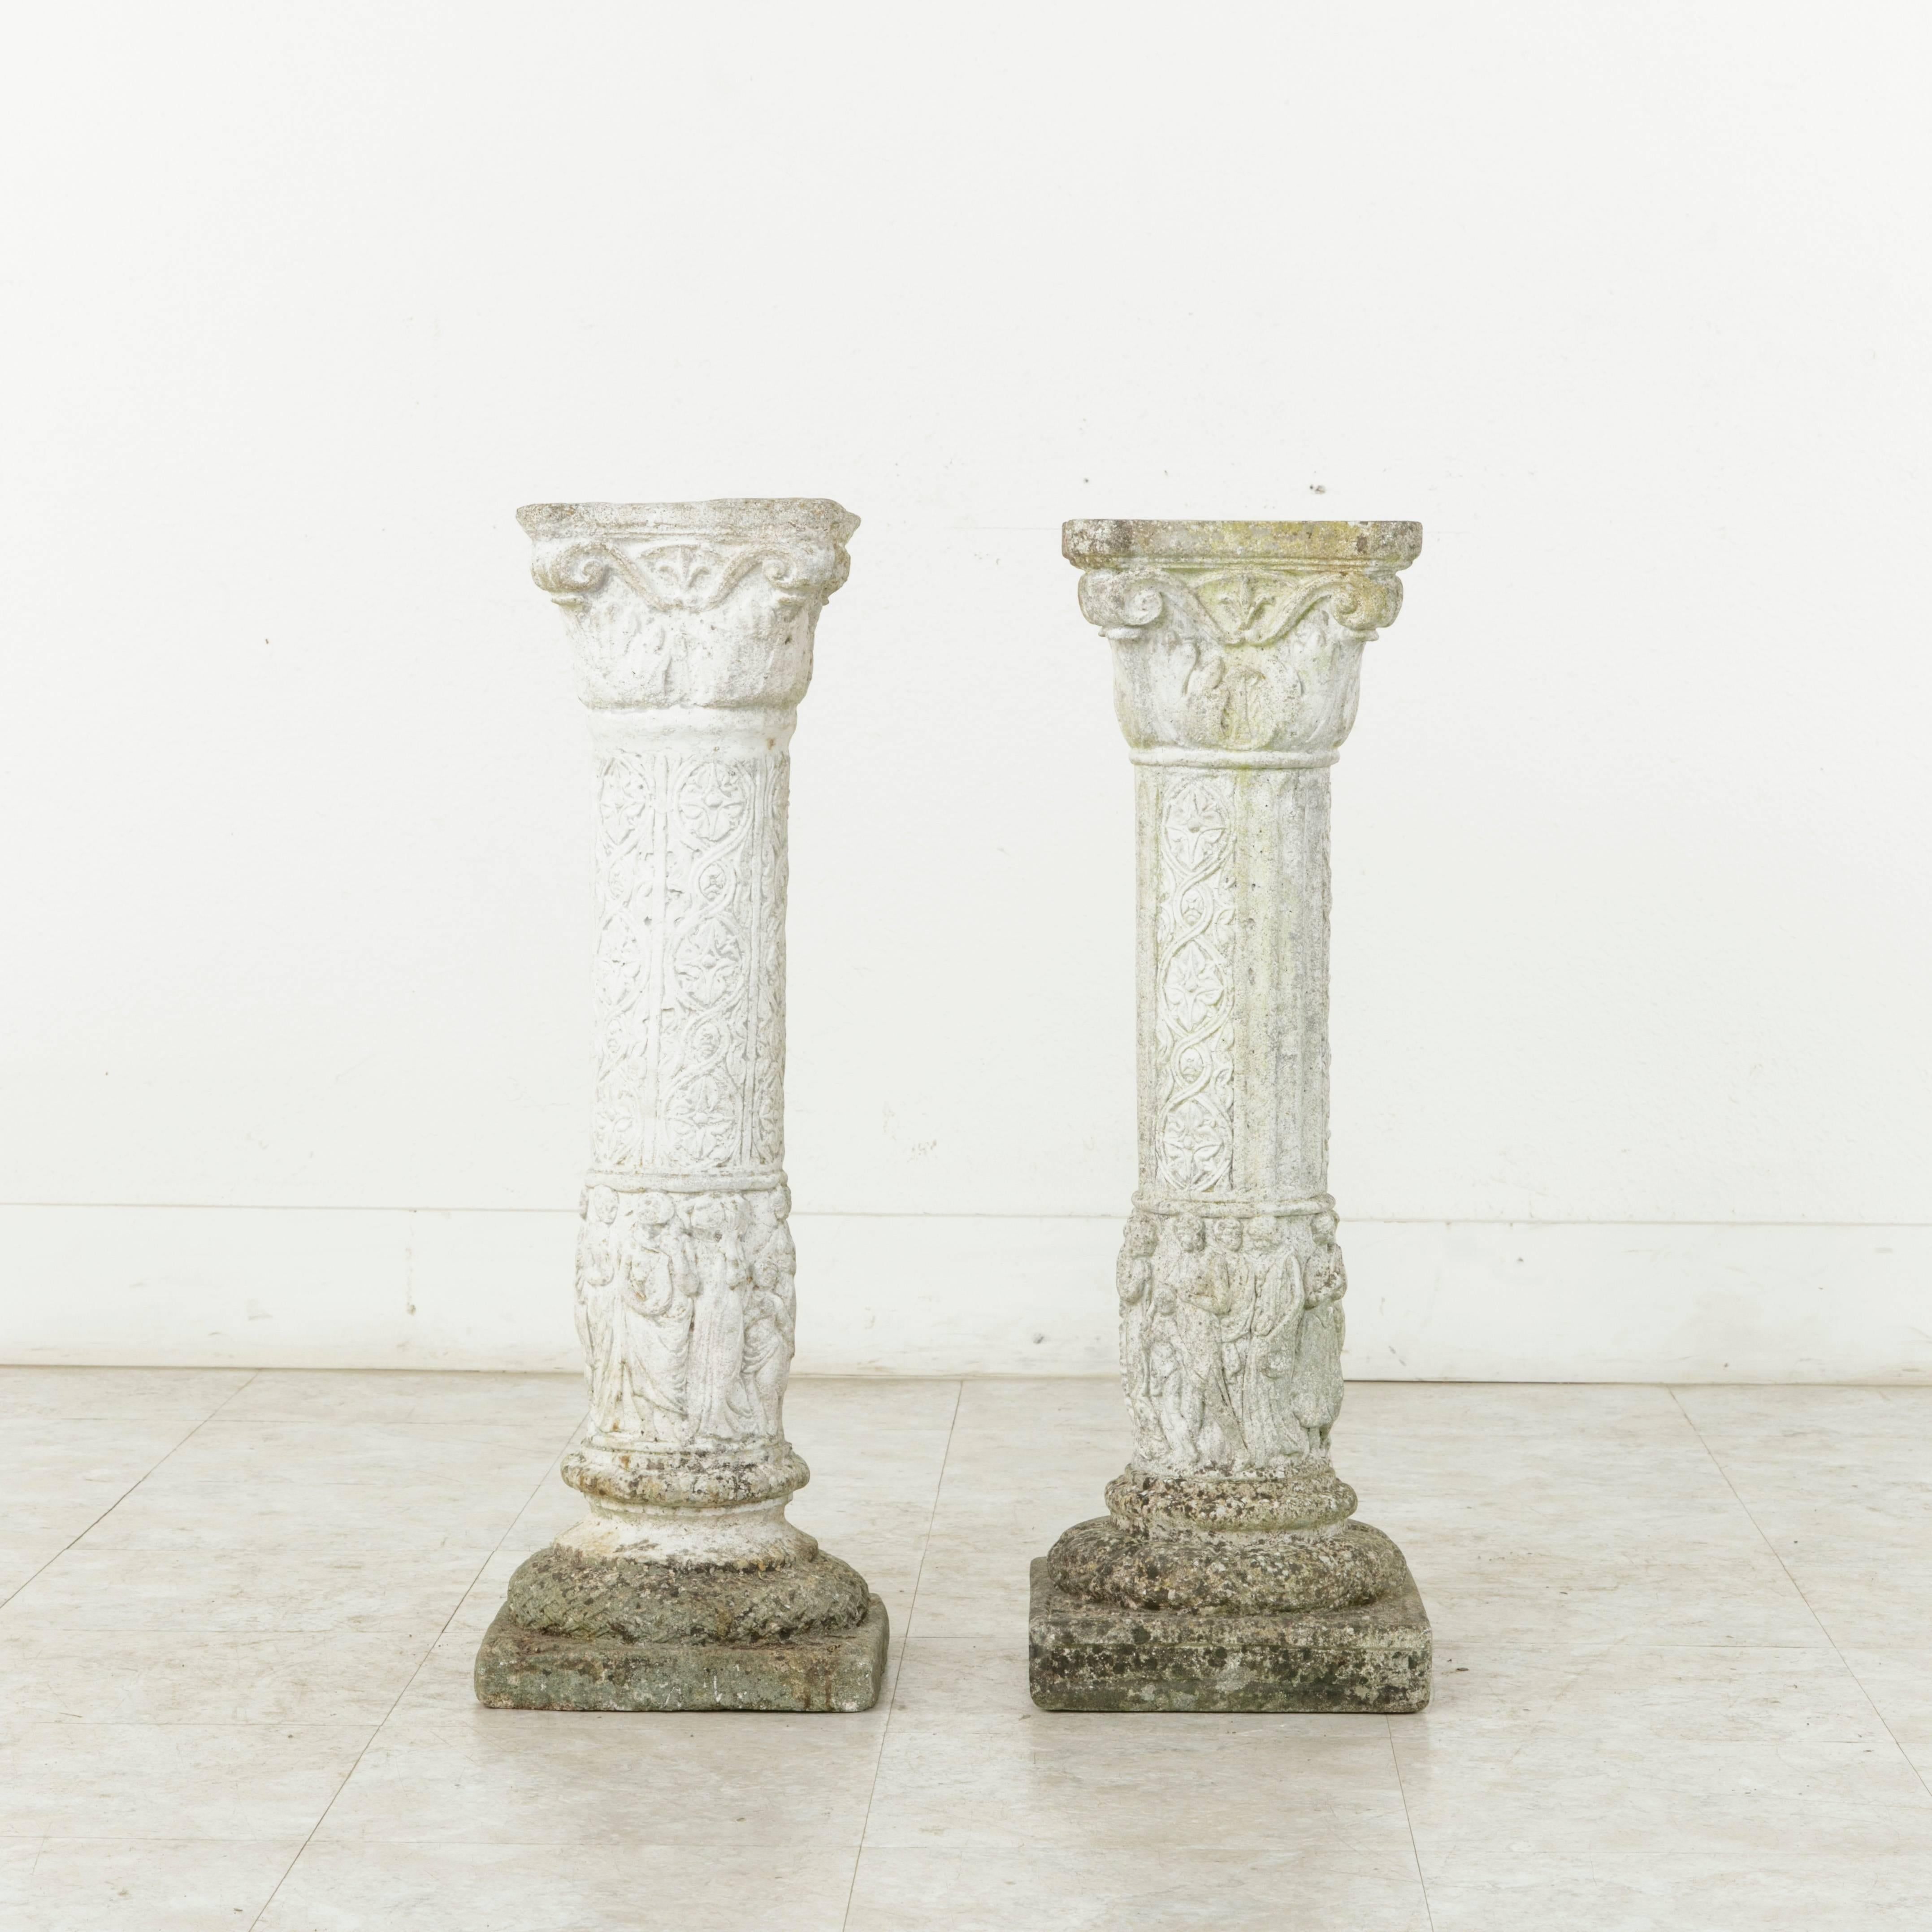 This pair of cast stone columns or pillars from the mid-20th century originally graced the gardens of a manor house in Normandy, France. Motifs of classical figures surround the base of the columns with interlaced rosettes above. A false pair, one